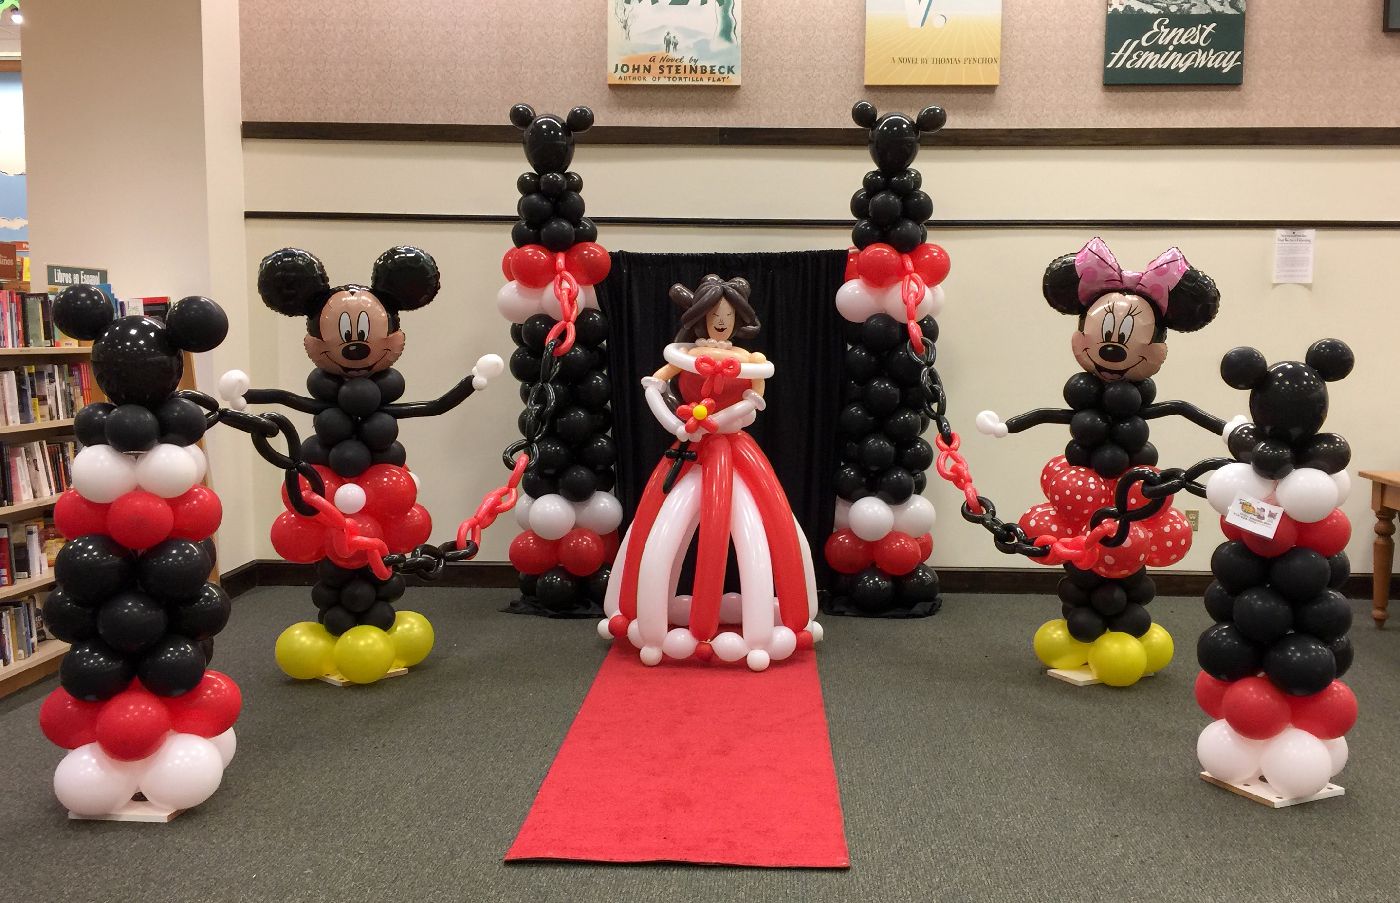 Mouse and princess balloon decorations for a children's story time event in Cary NC